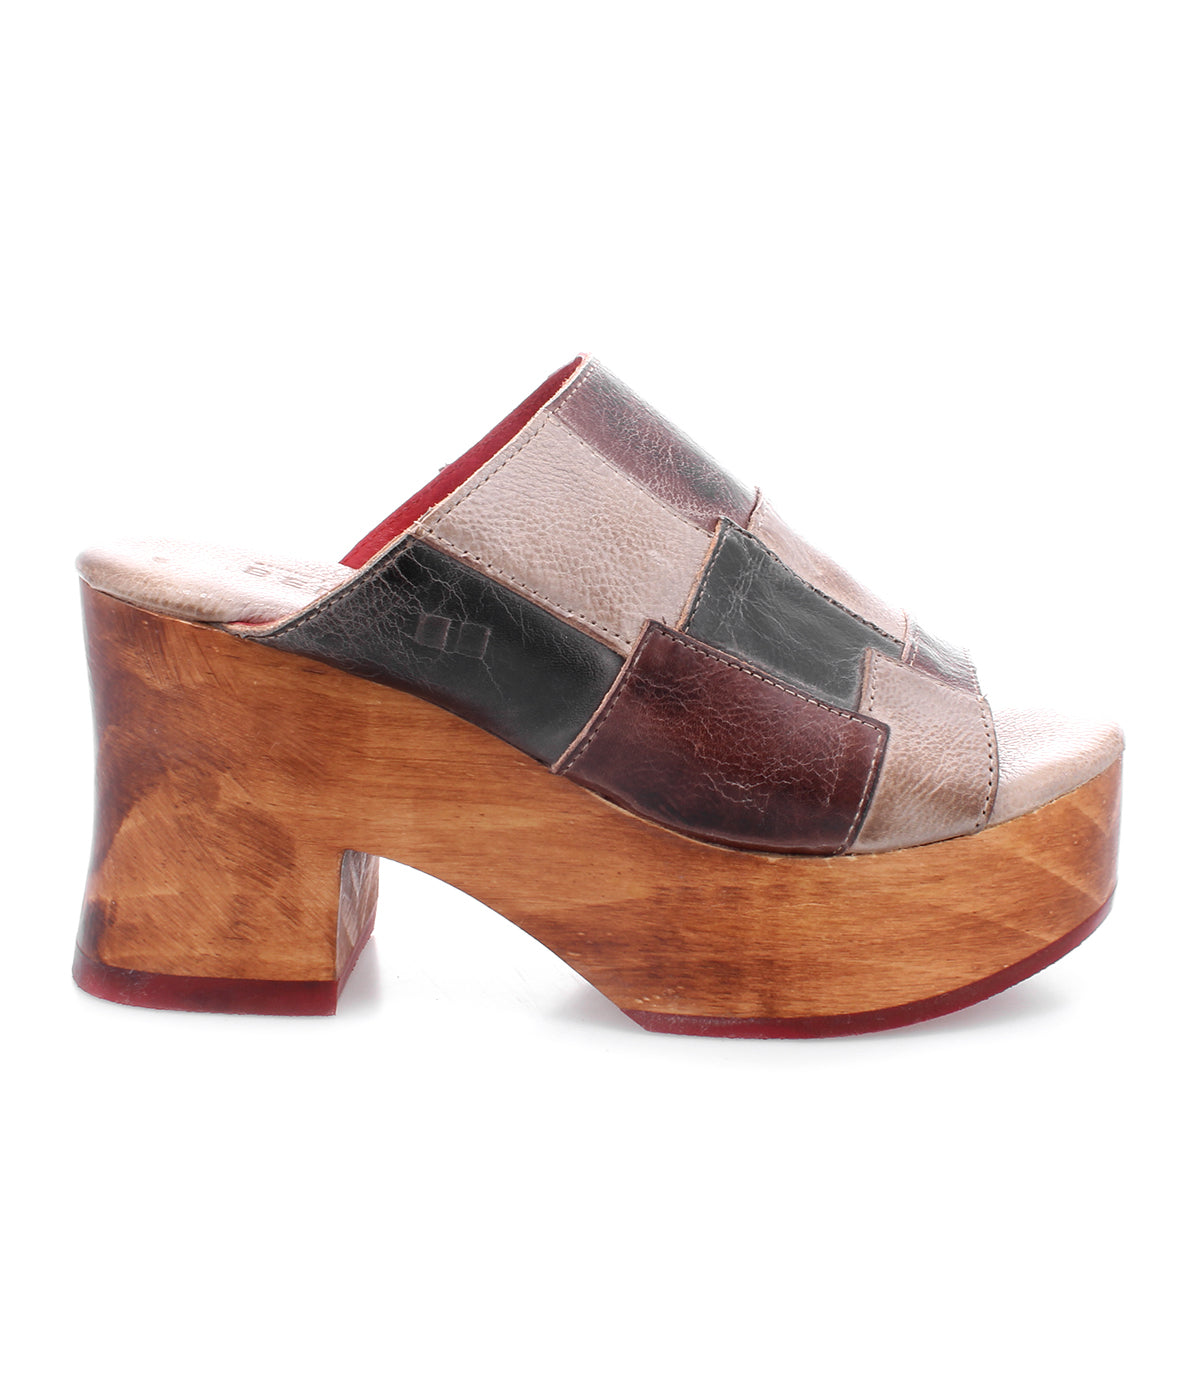 A women's Vanquish wooden clog with an open-toe design and a patchwork pattern by Bed Stu.